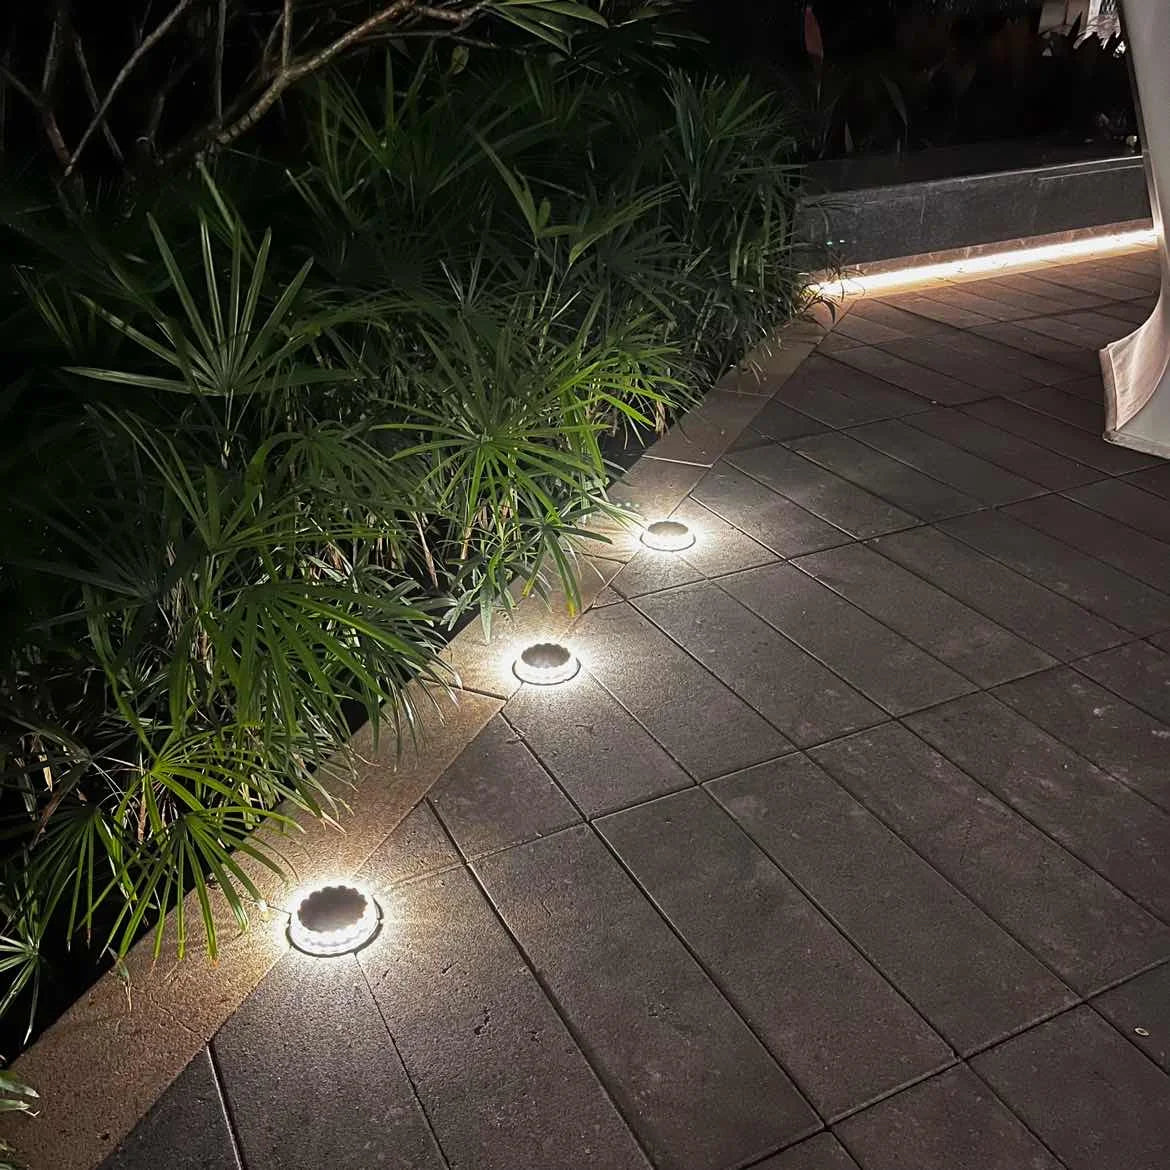 4Pack Solar Ground Light, Durable, waterproof LED solar lights for outdoor use on lawns, paths, and patios.